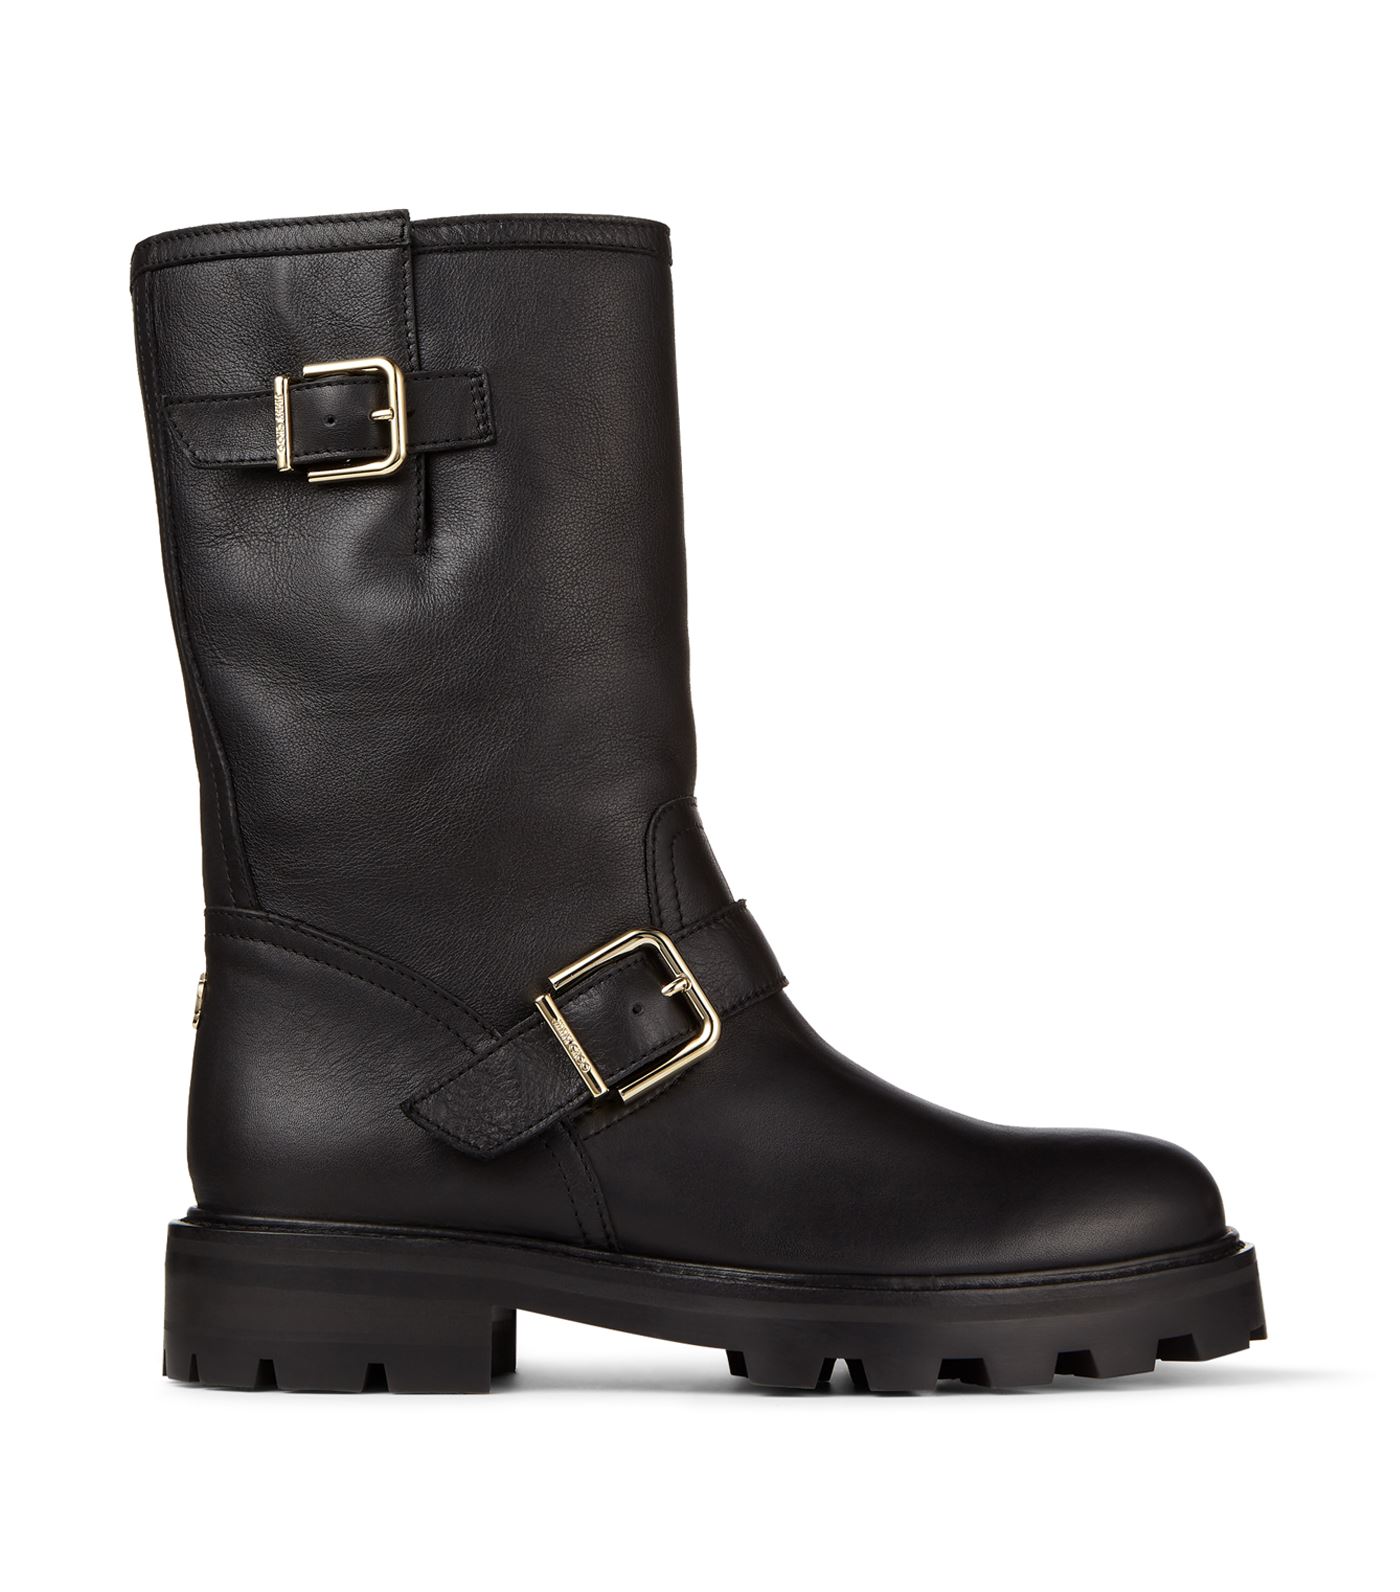 Jimmy Choo - Give your outfit a timeless look in the form of a classic biker boot by Jimmy Choo. Cra